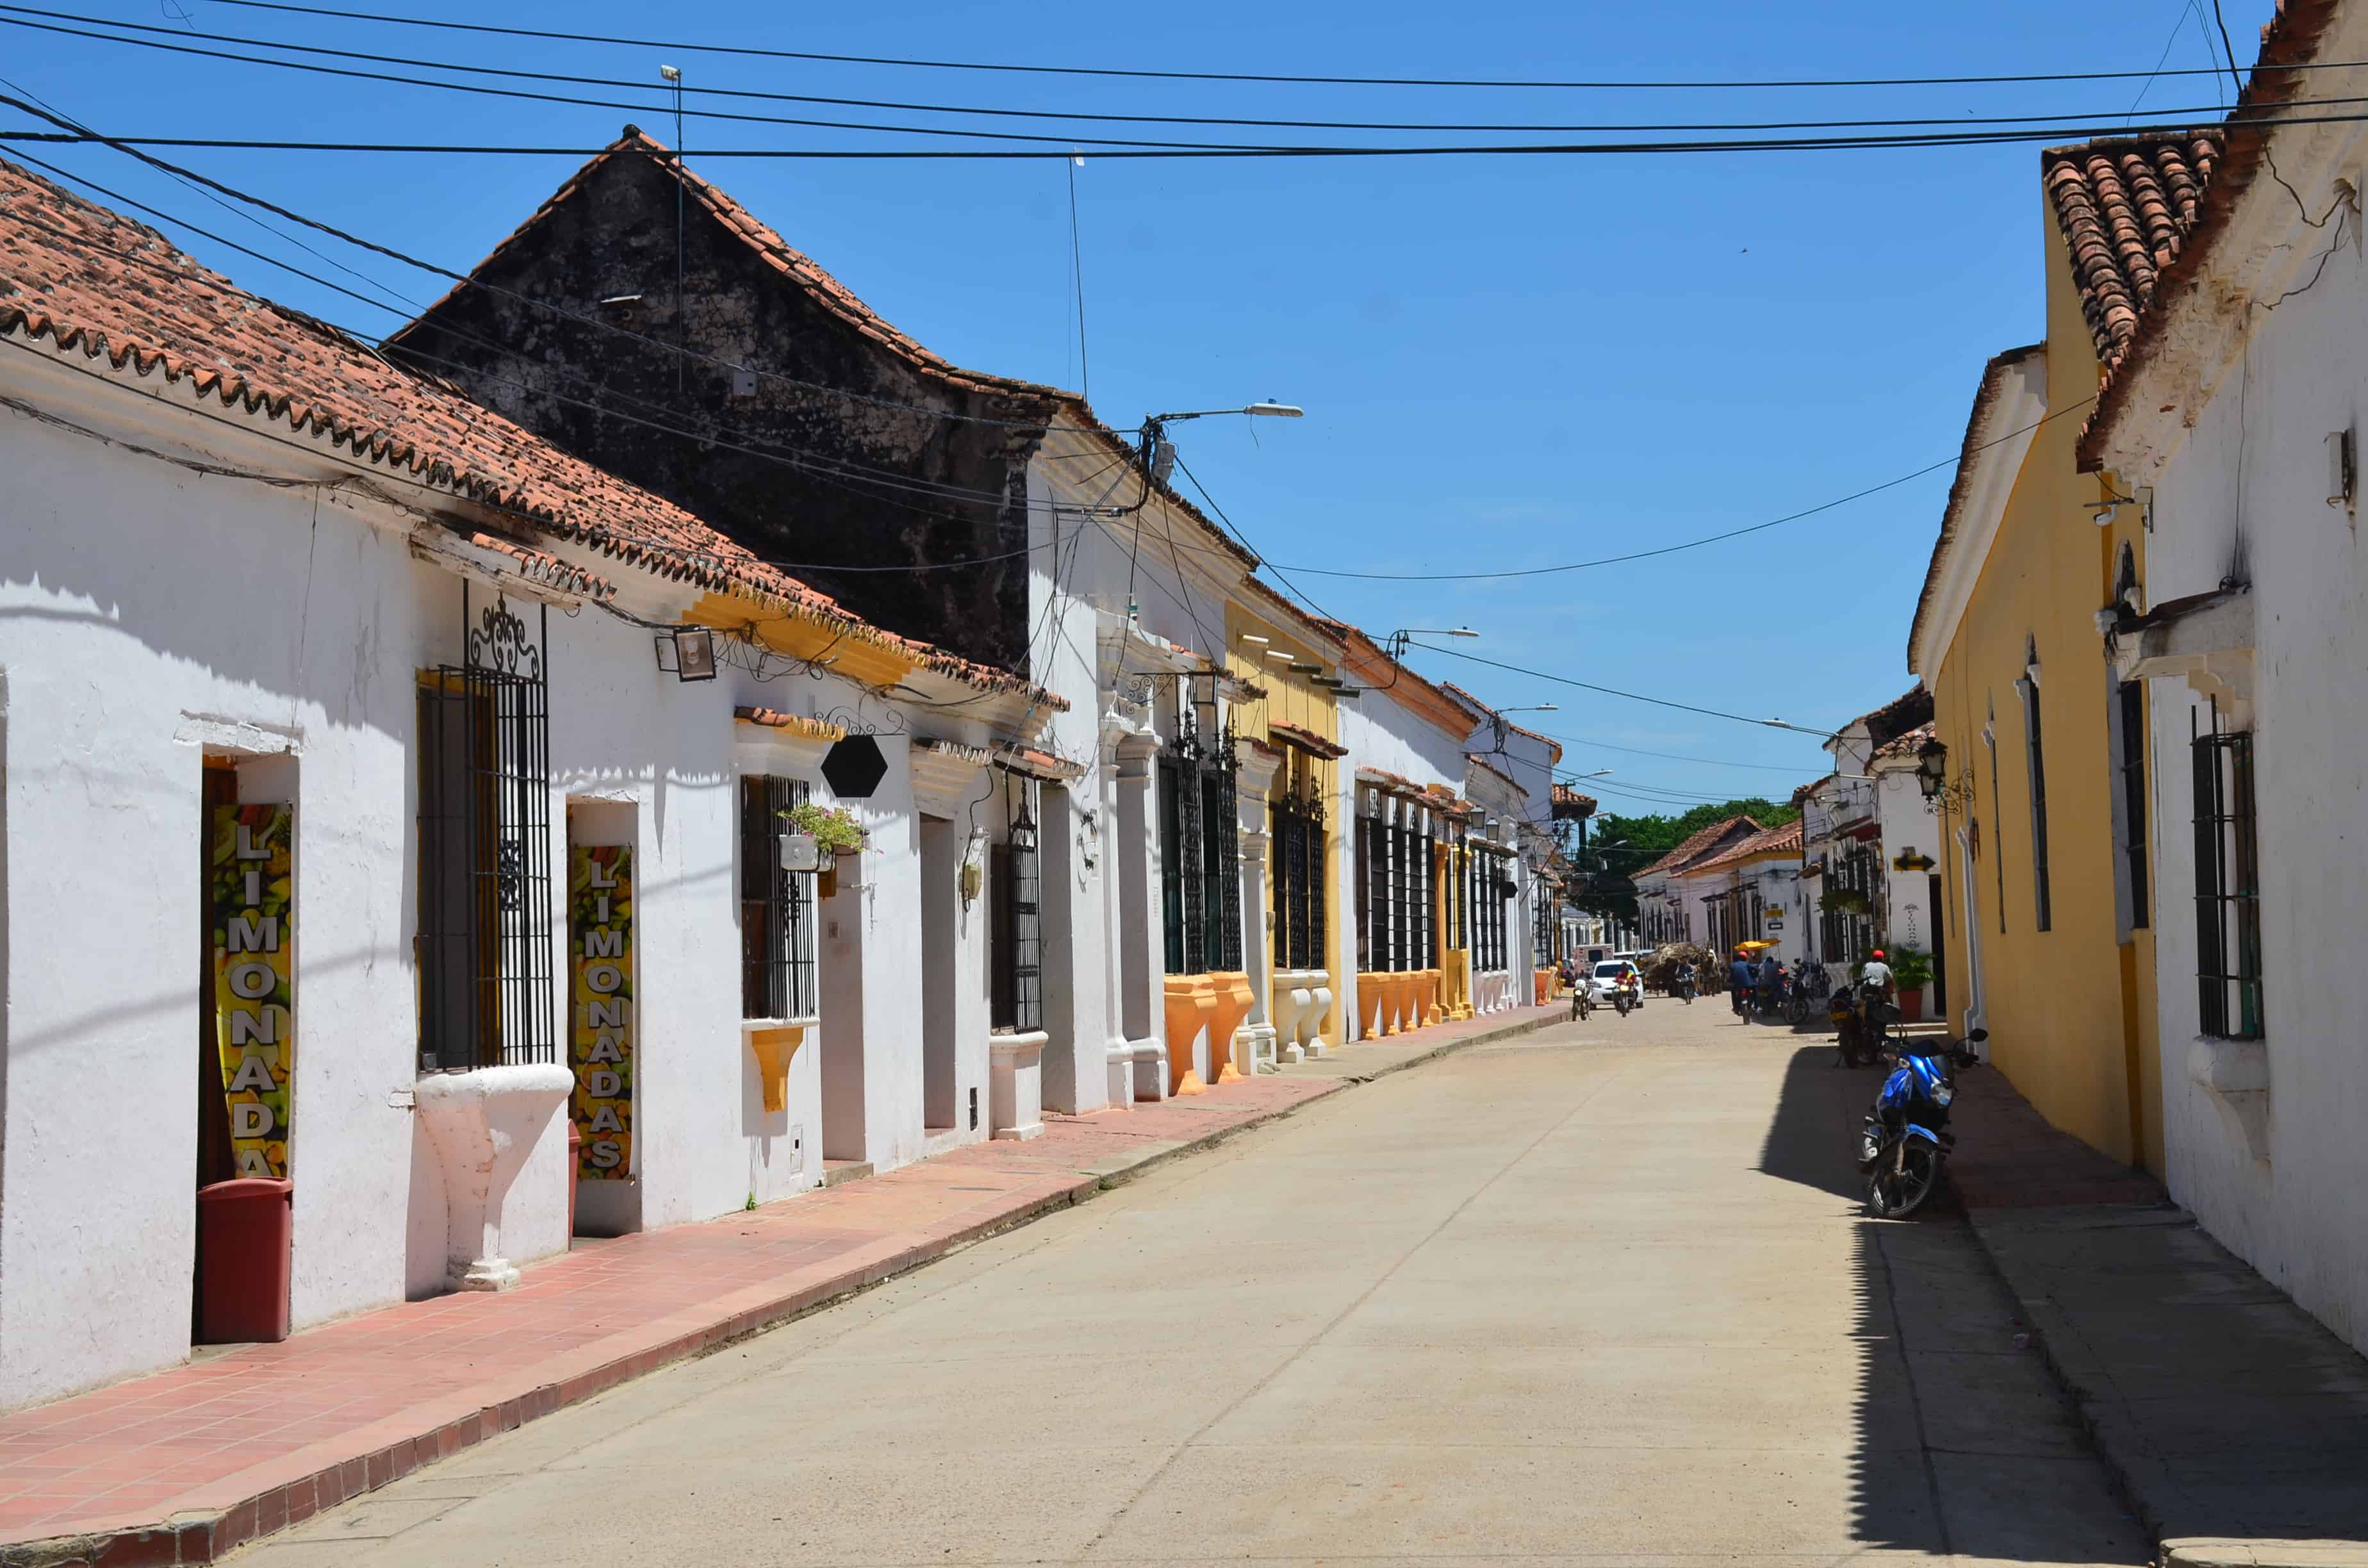 A section of Calle del Medio in Mompox, Bolívar, Colombia